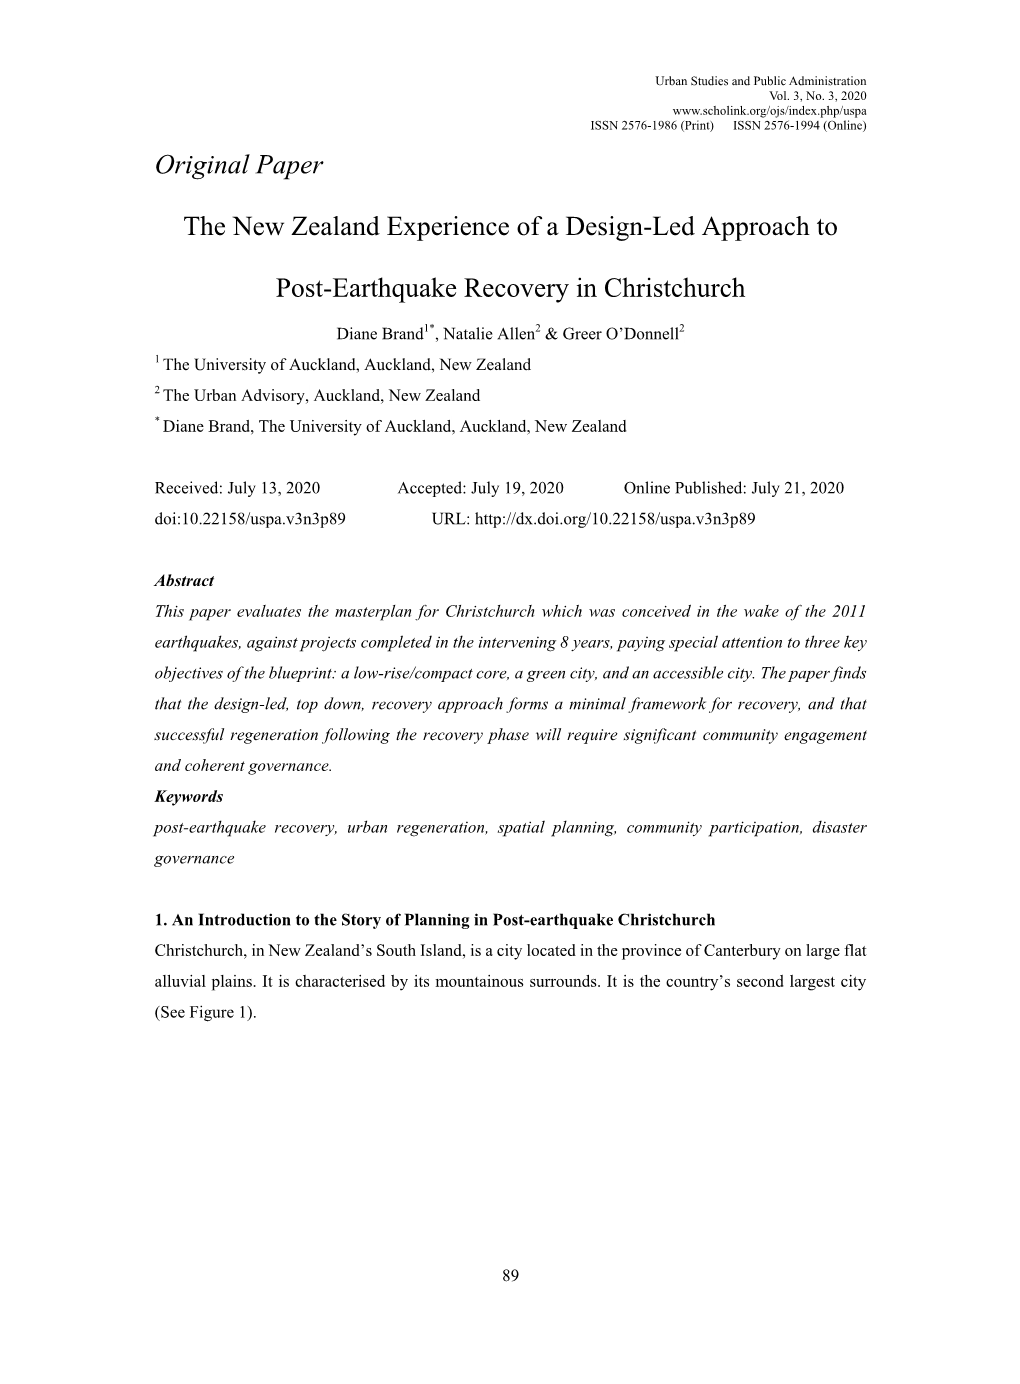 Original Paper the New Zealand Experience of a Design-Led